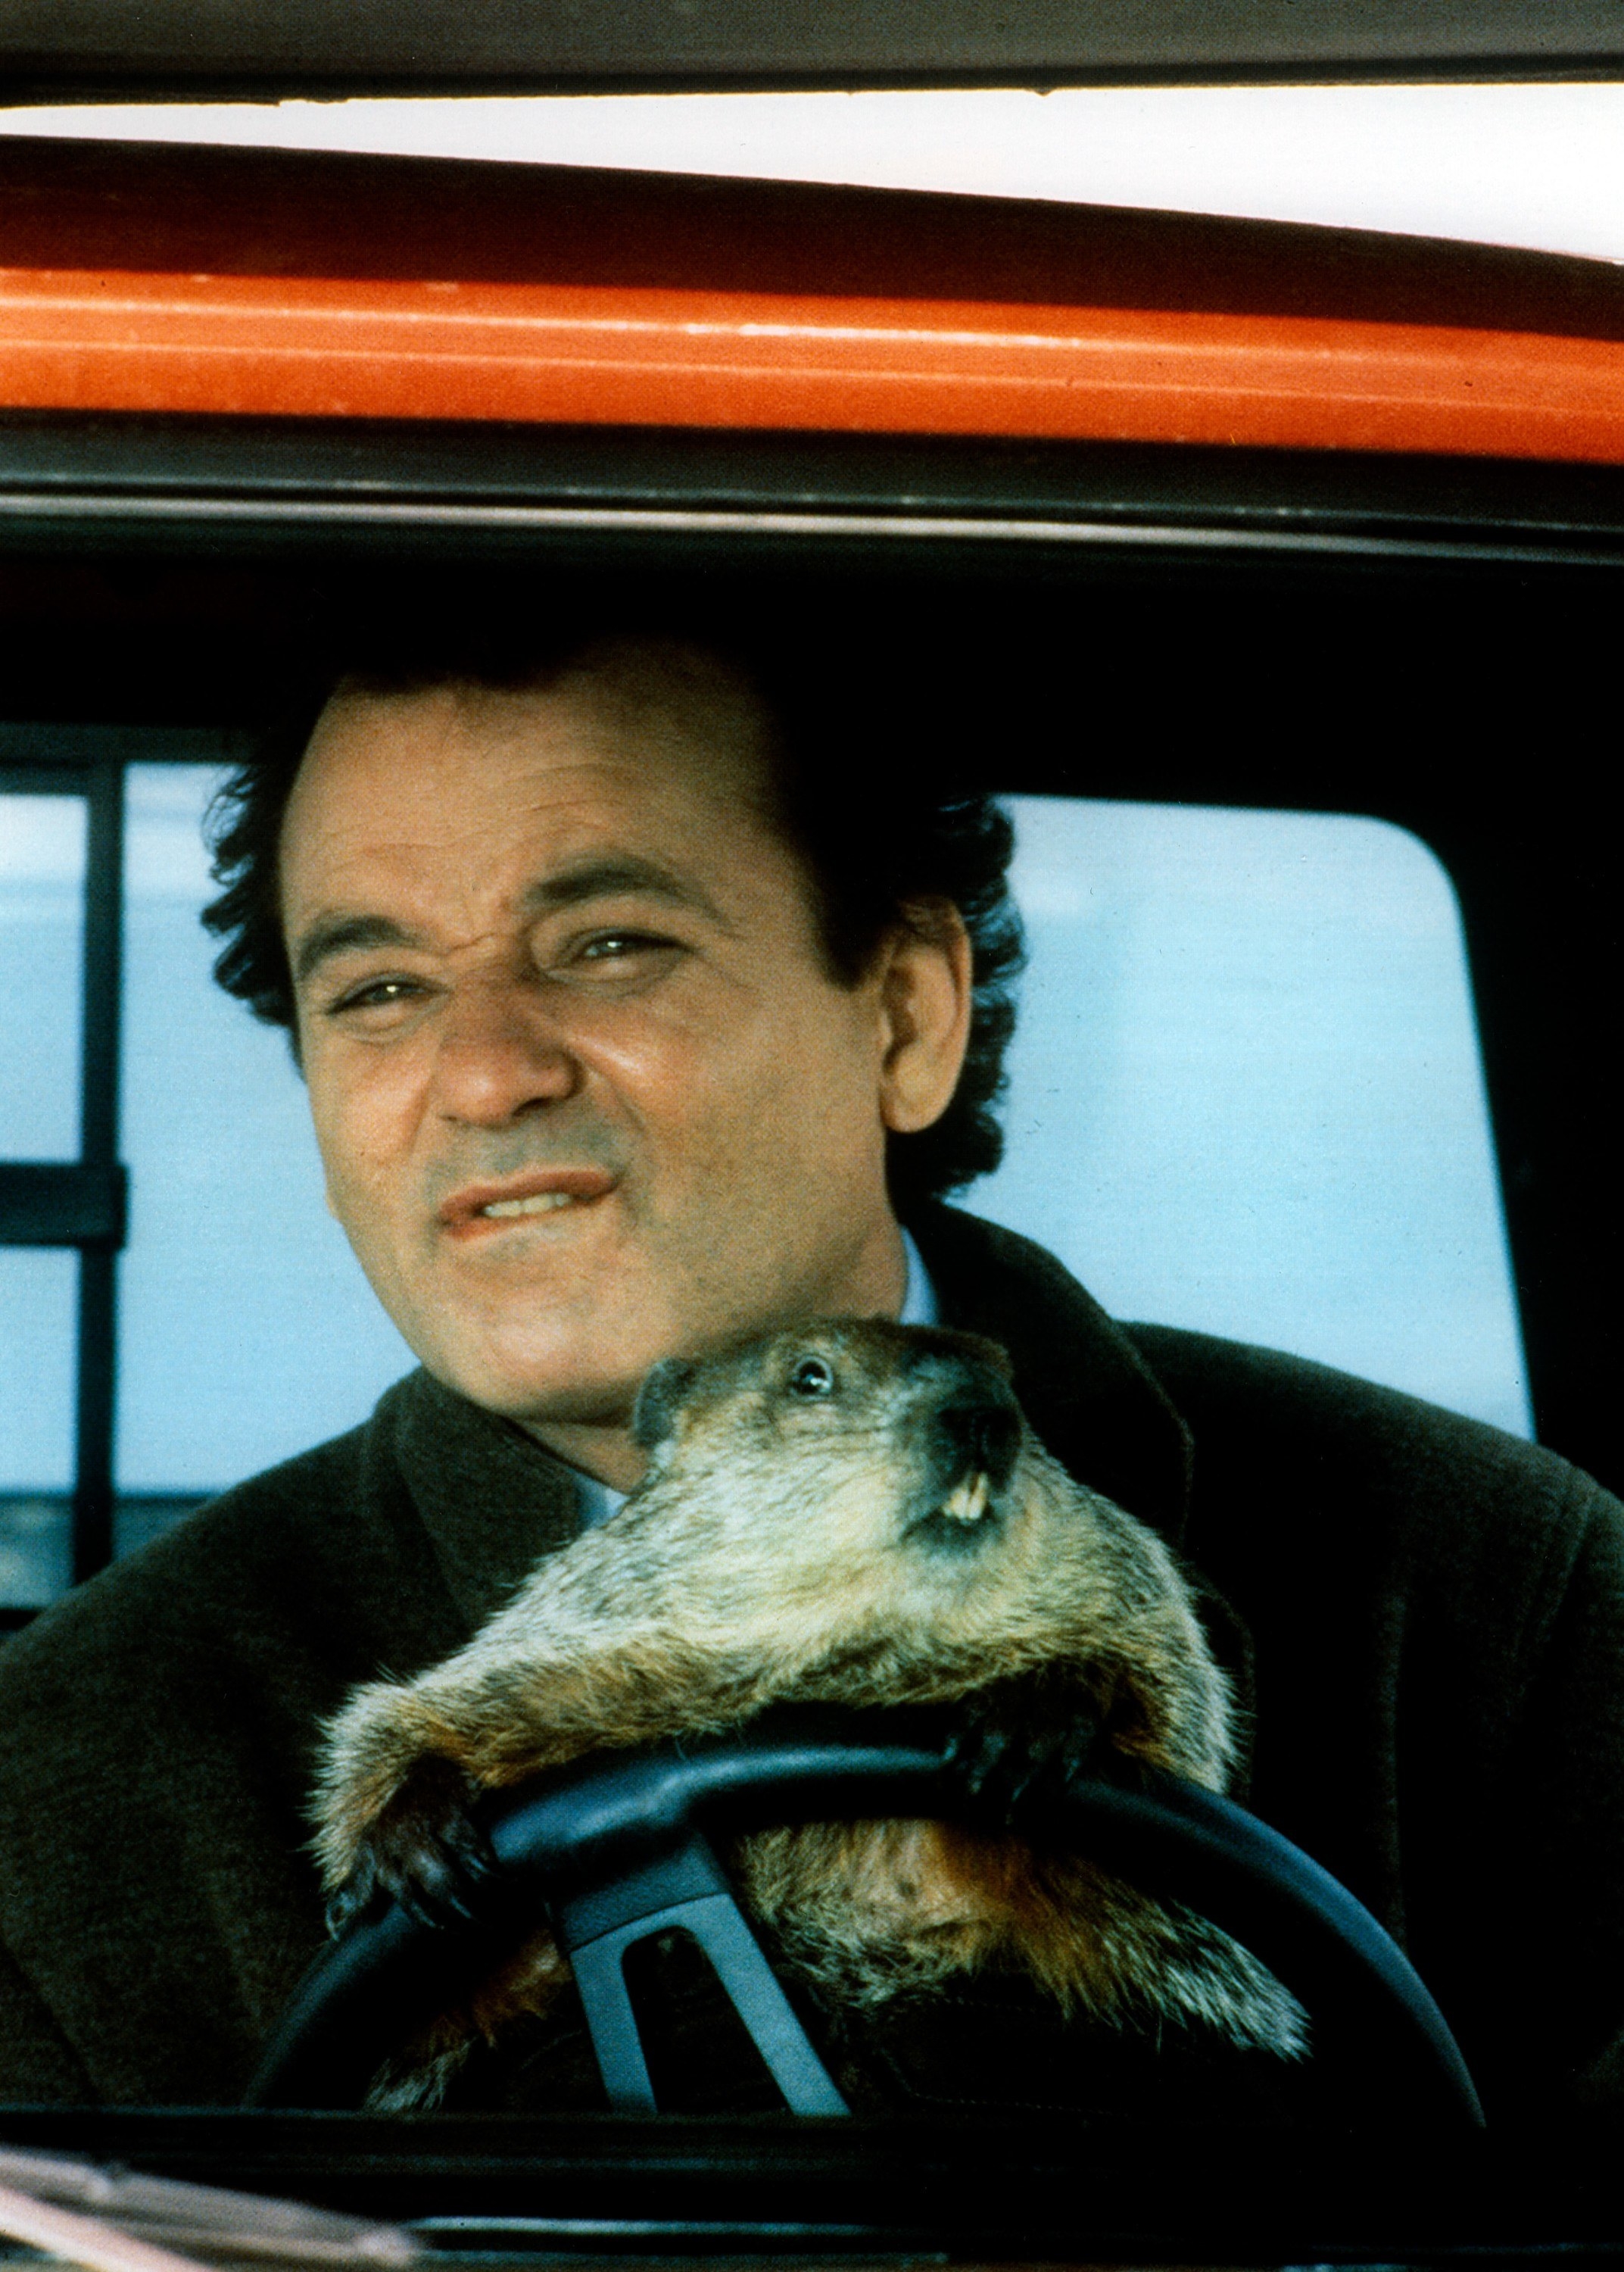 Murray and the groundhog in the film